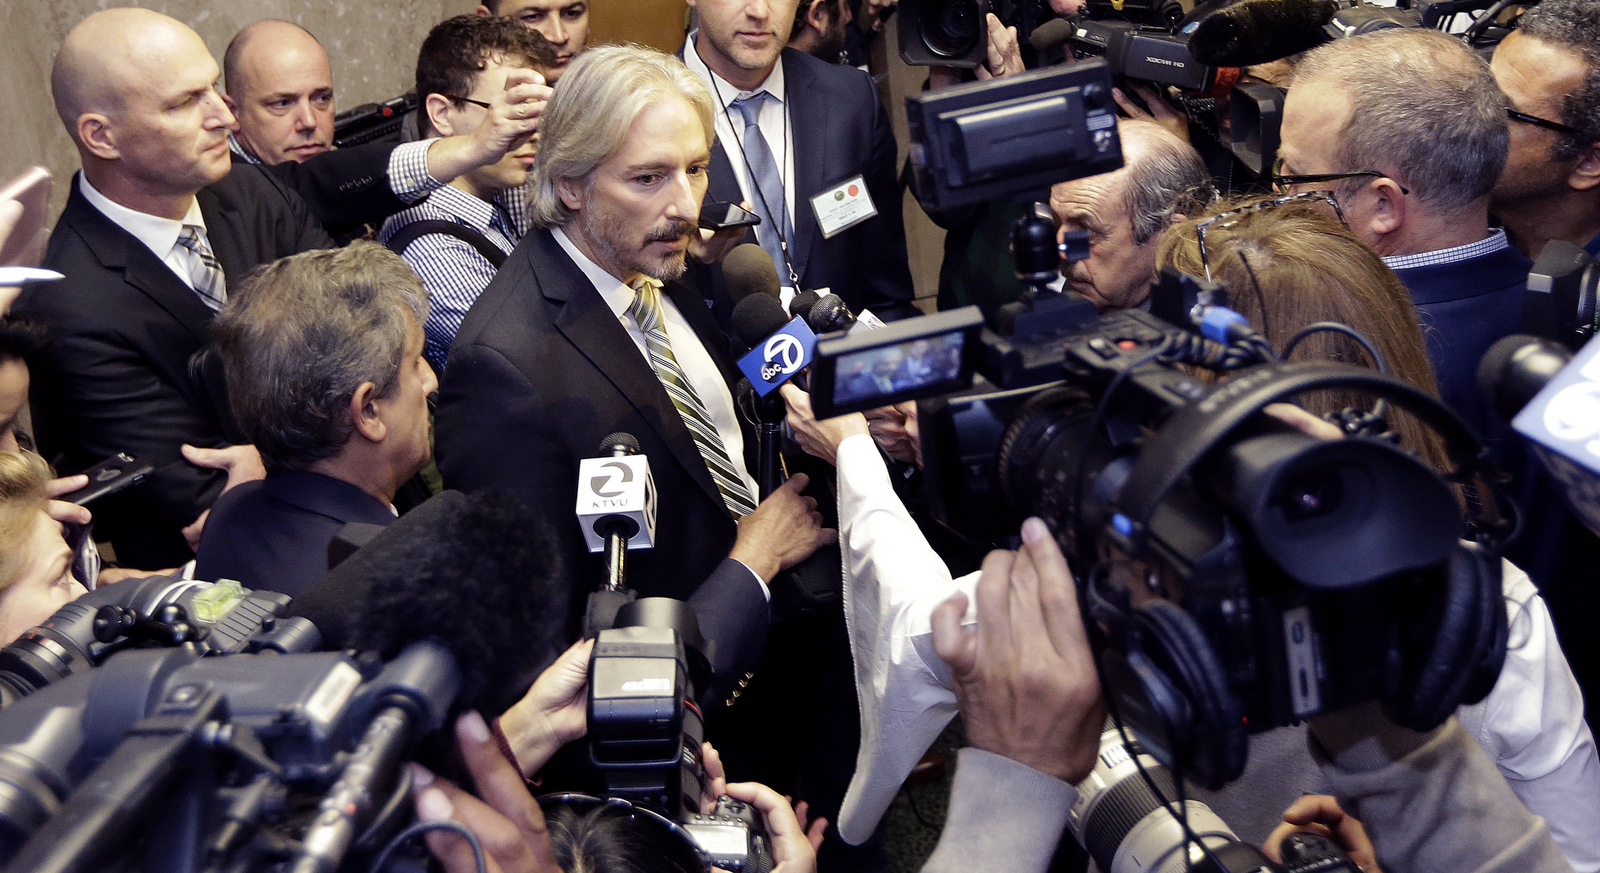 Matt Gonzalez speaks to reporters after his client Jose Zarate was acquitted in the murder and involuntary manslaughter in the death of Kate Steinle. (AP/Jeff Chiu)